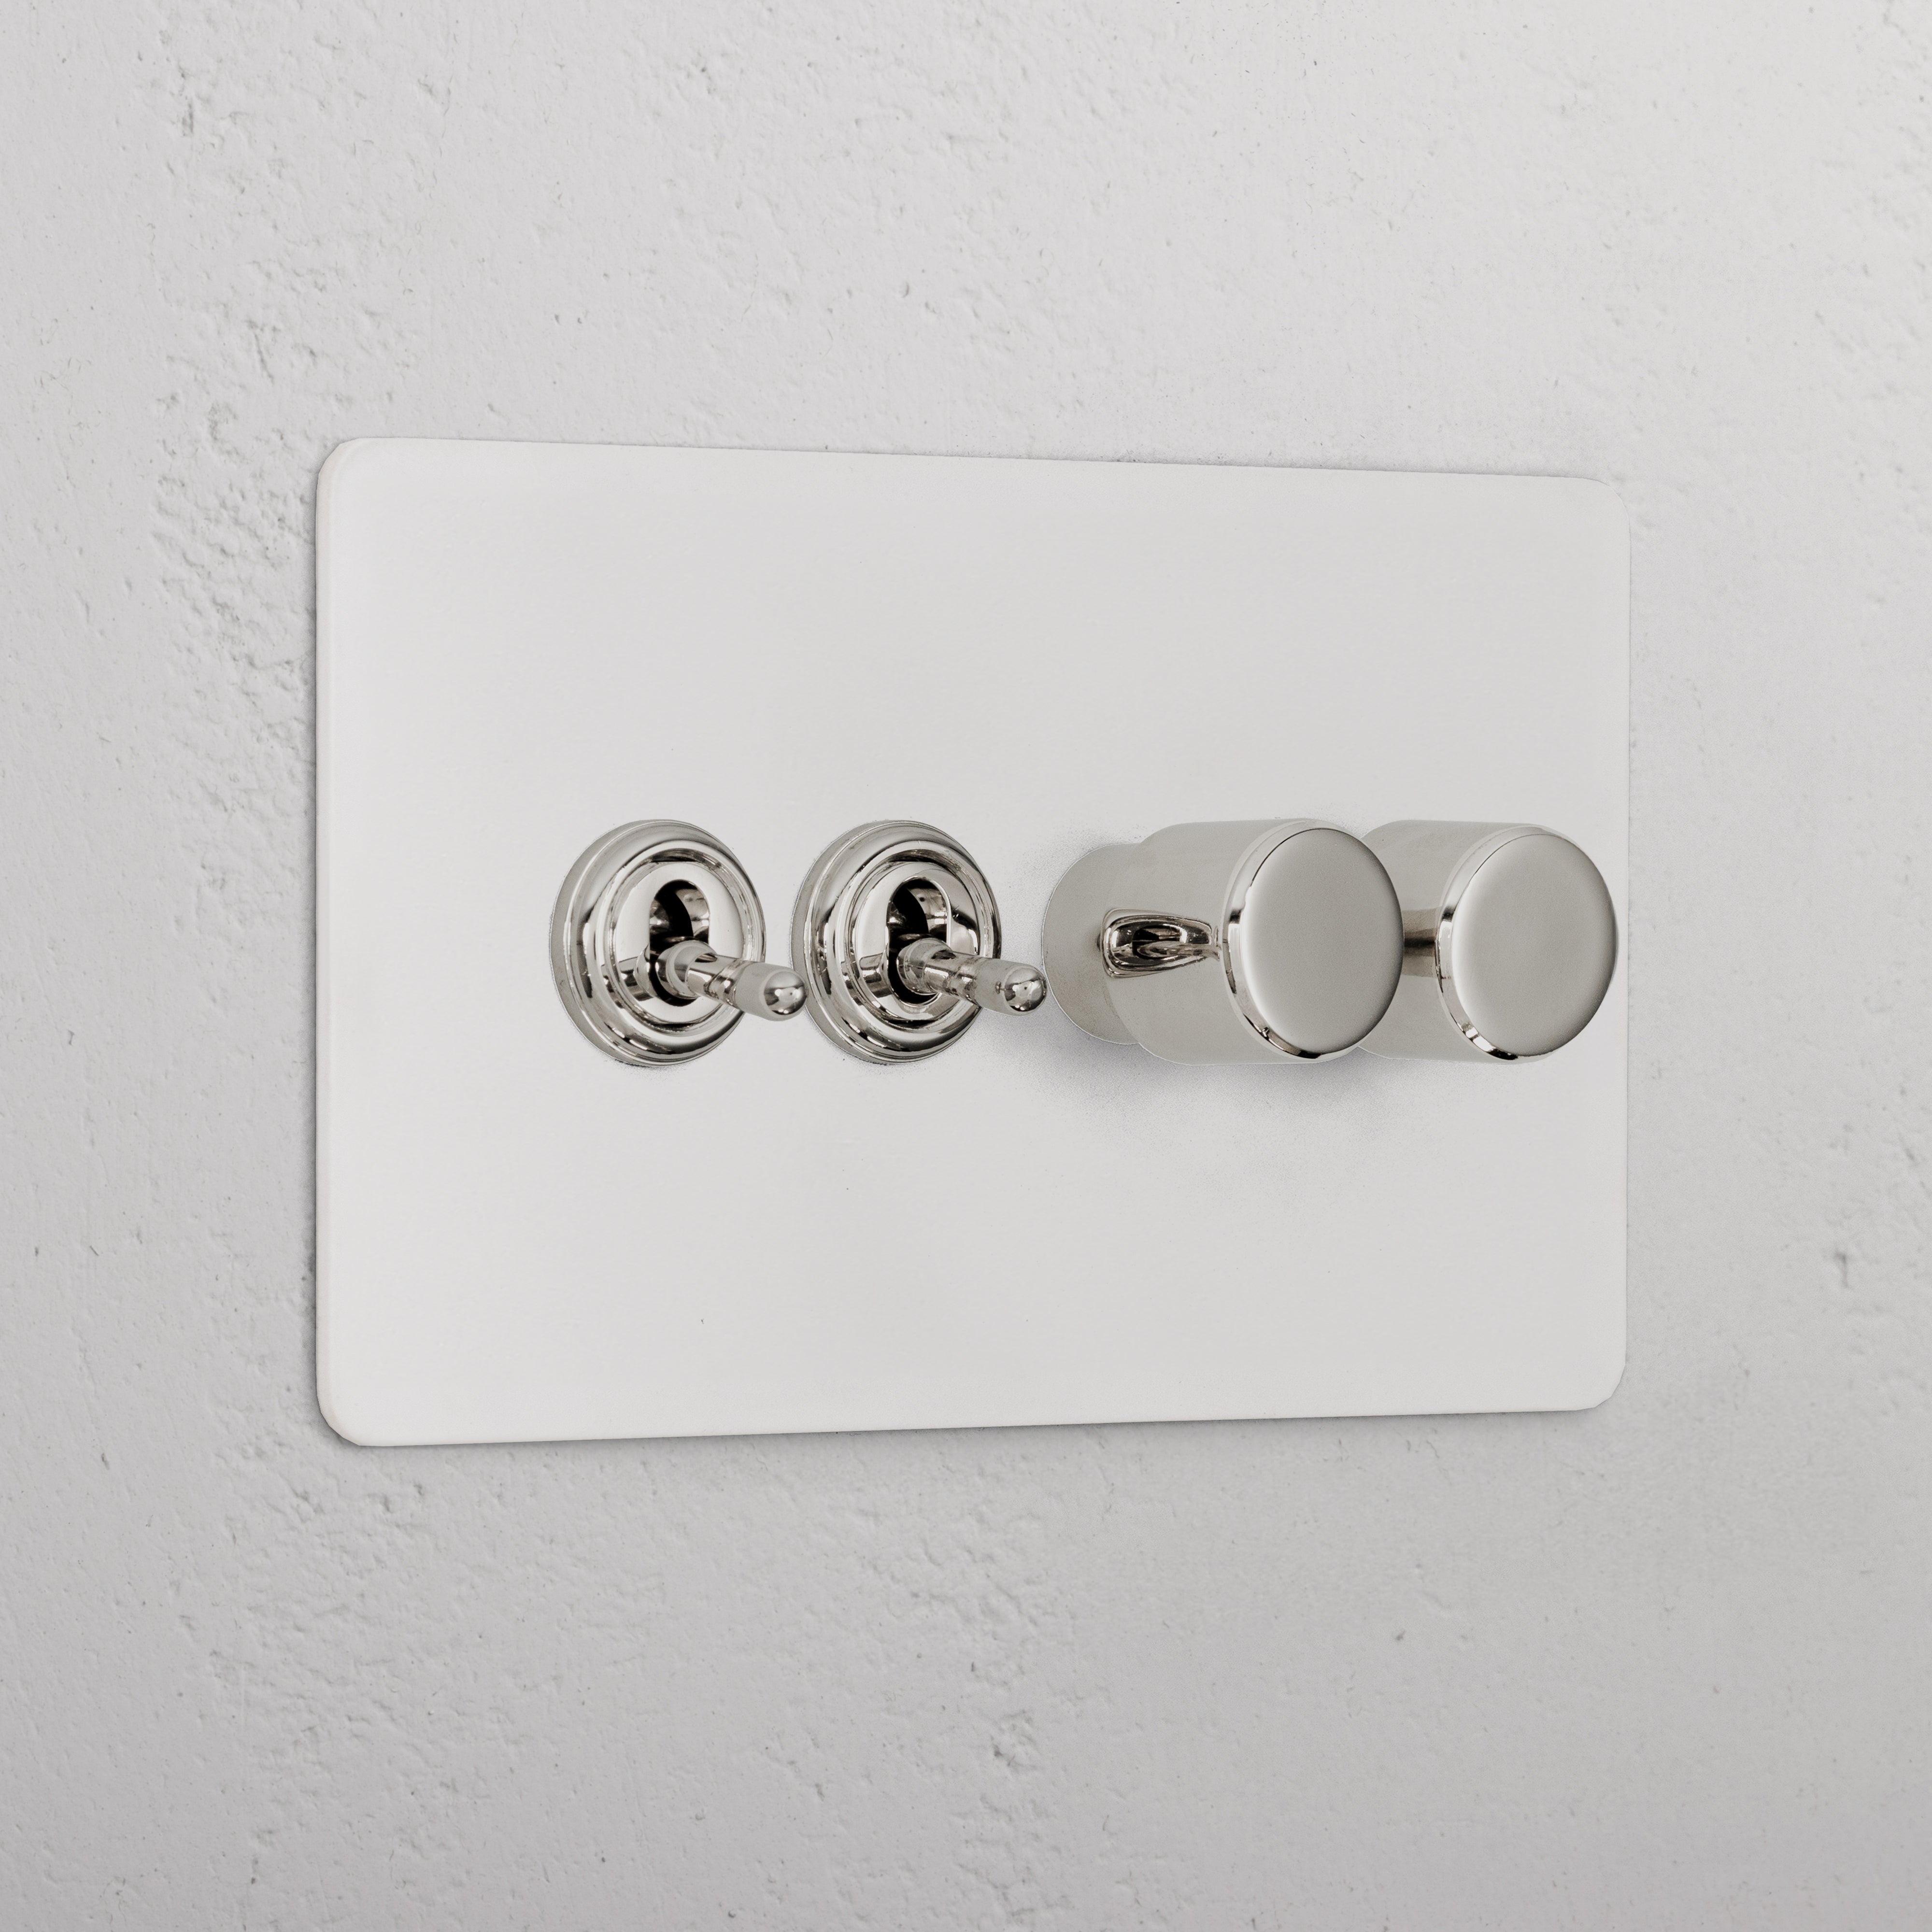 4G Mixed Switch 2T2D _ Paintable Polished Nickel